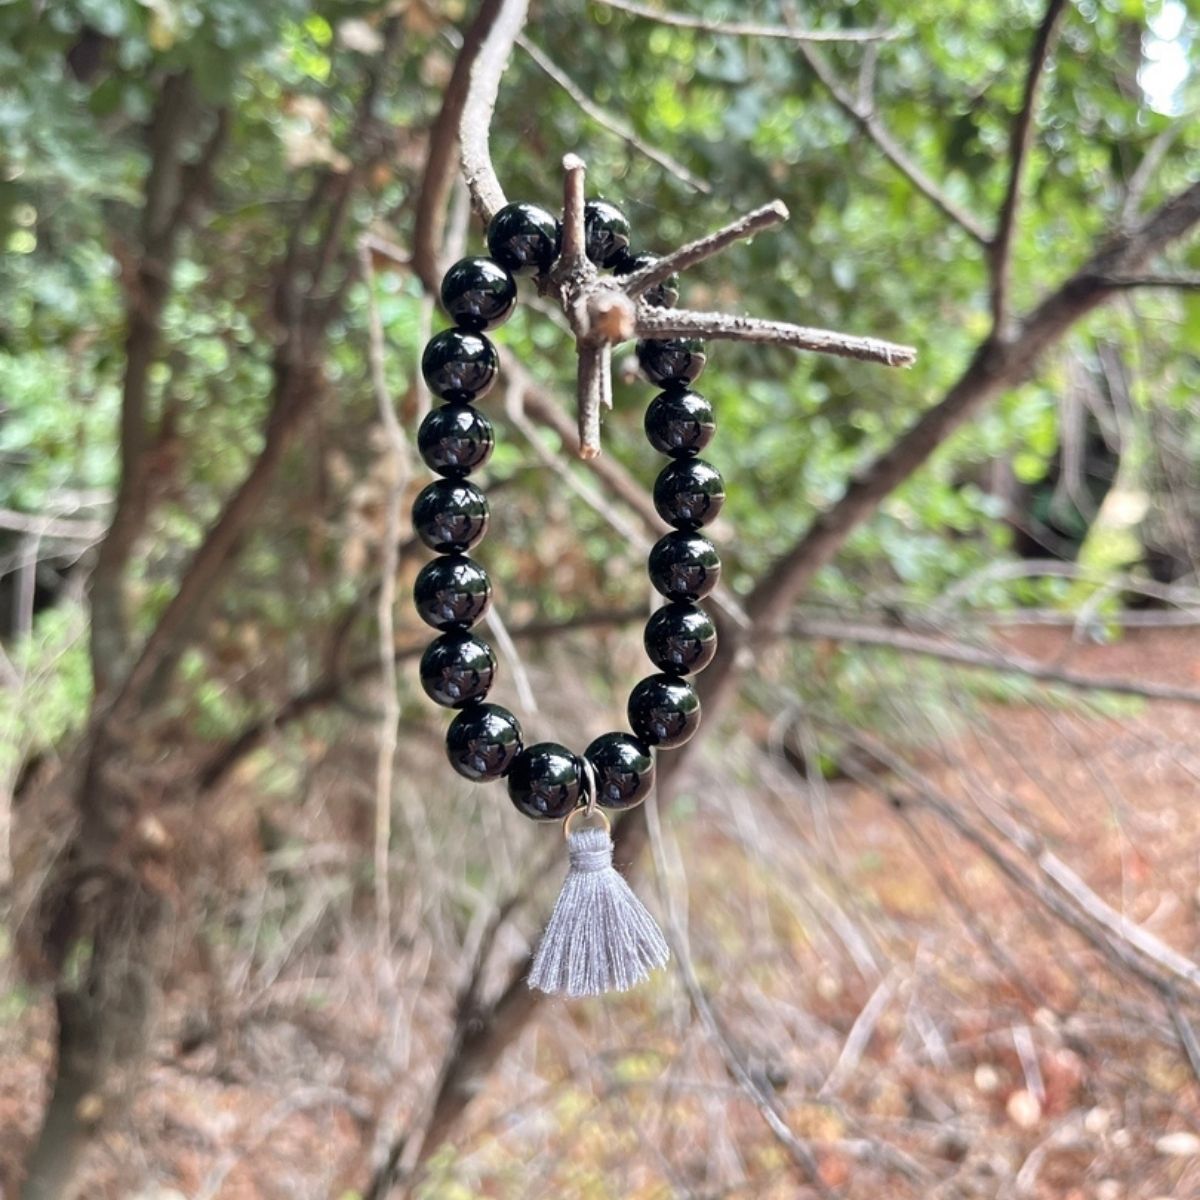 Onyx Bracelet with Tassle to Remind Us that Our Shadows are Parts of Us. Unisex Black Onyx Bracelet for Self-Control. Onyx helps one have self-control and anchors one’s flighty energy. Black, usually a color of “darkness” Onyx remind wearers that shadows are parts of us, and that we ALL have them.